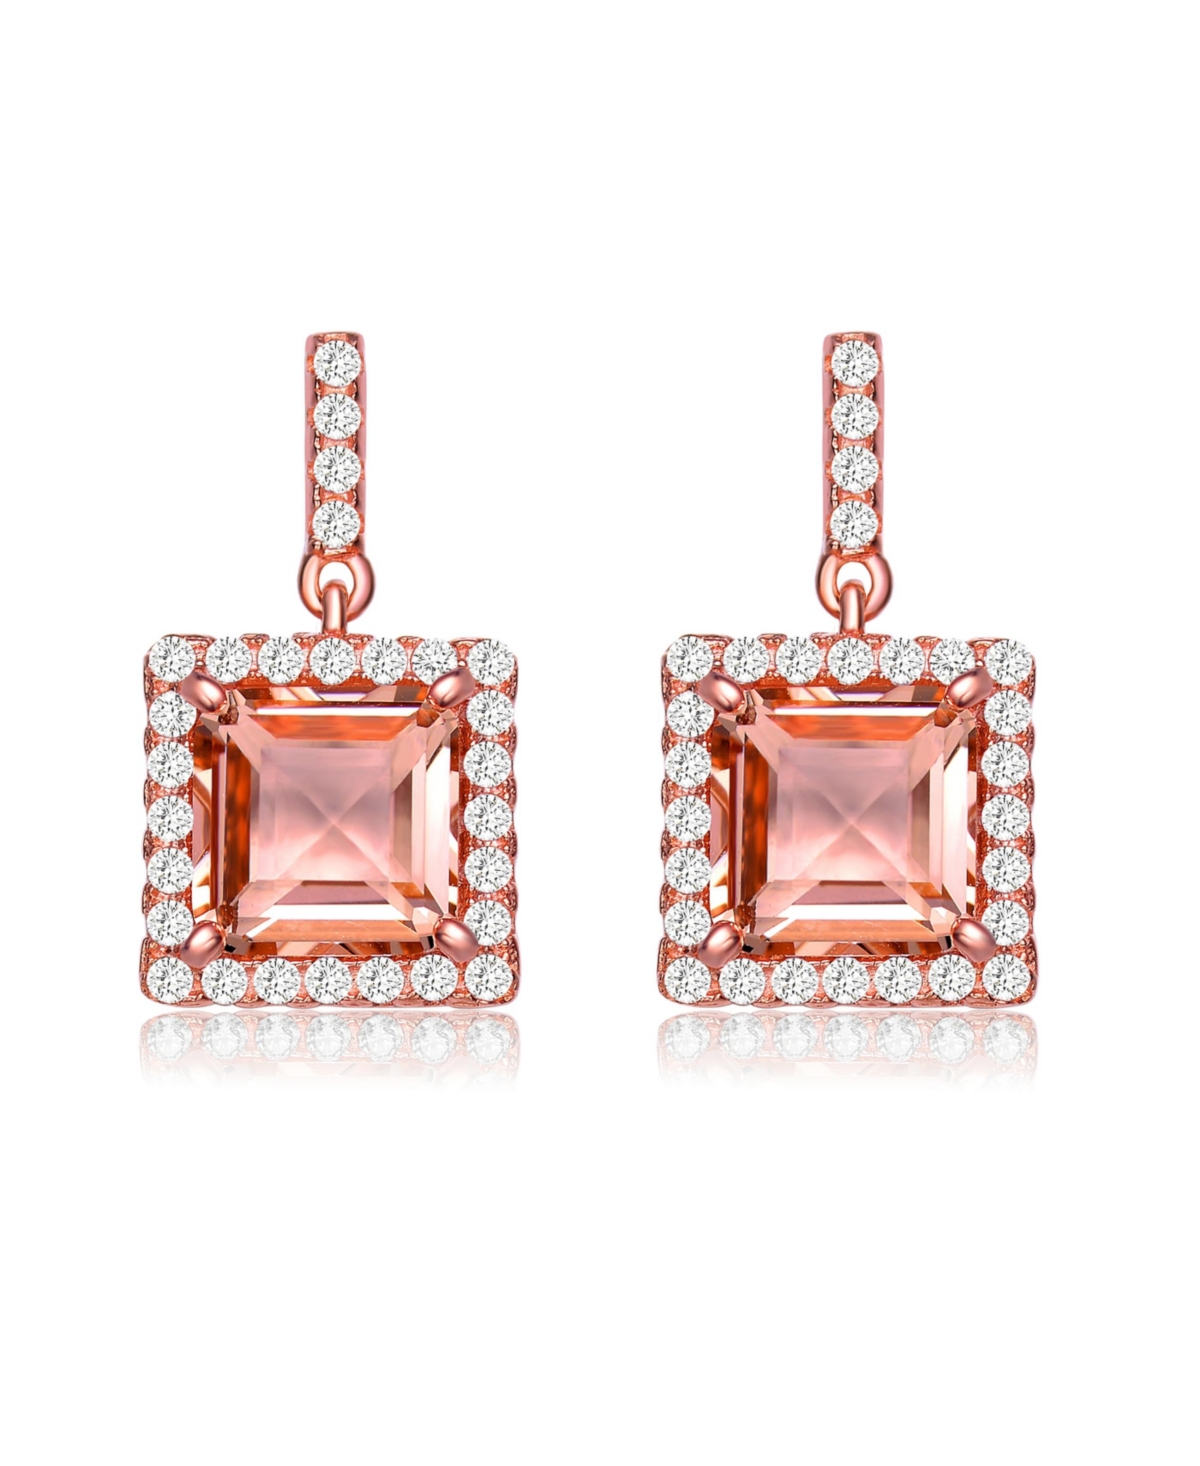 Genevive 18K Rose Gold Overlay Square Champagne Cubic Zirconia Earrings